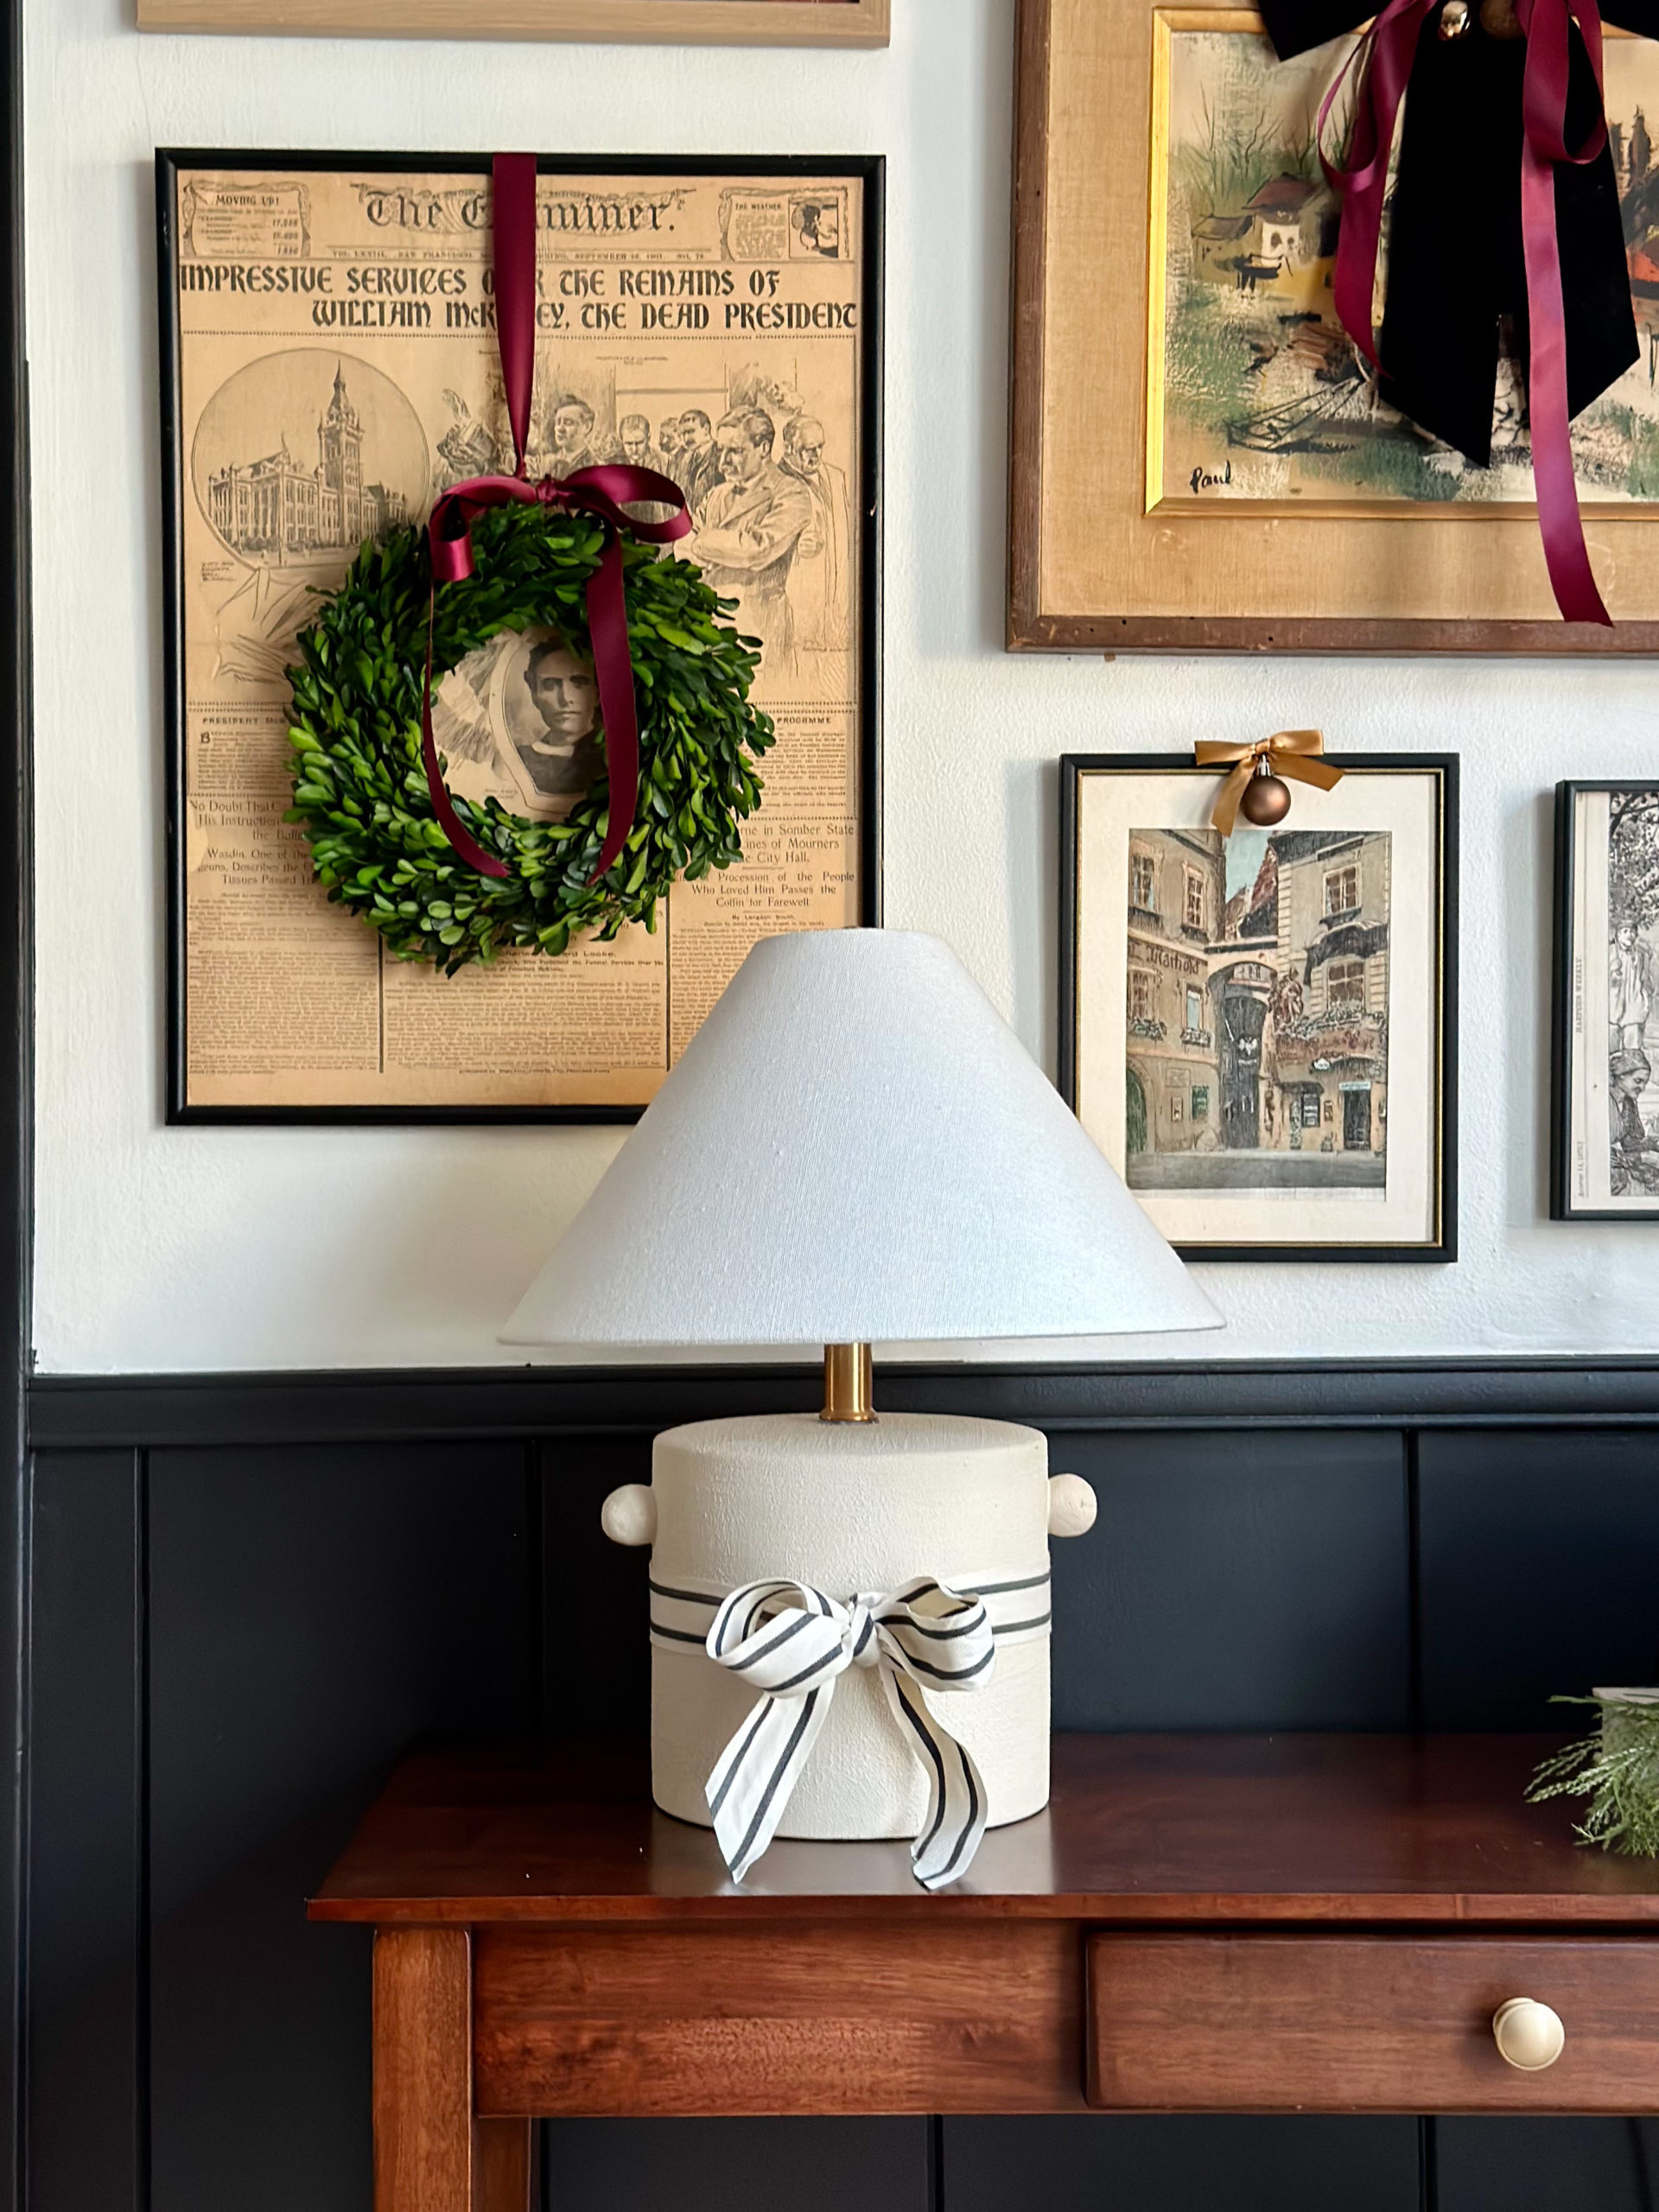 easy and budget friendly ways to decorate for christmas, decorating with bows, bow on lamp, decorating art for christmas, ribbon on art, wreath on art, christmas decor ideas, black wainscoting, mopboard black by benjamin moore, swiss coffee paint color, white paint, thrifted art, decorating gallery wall